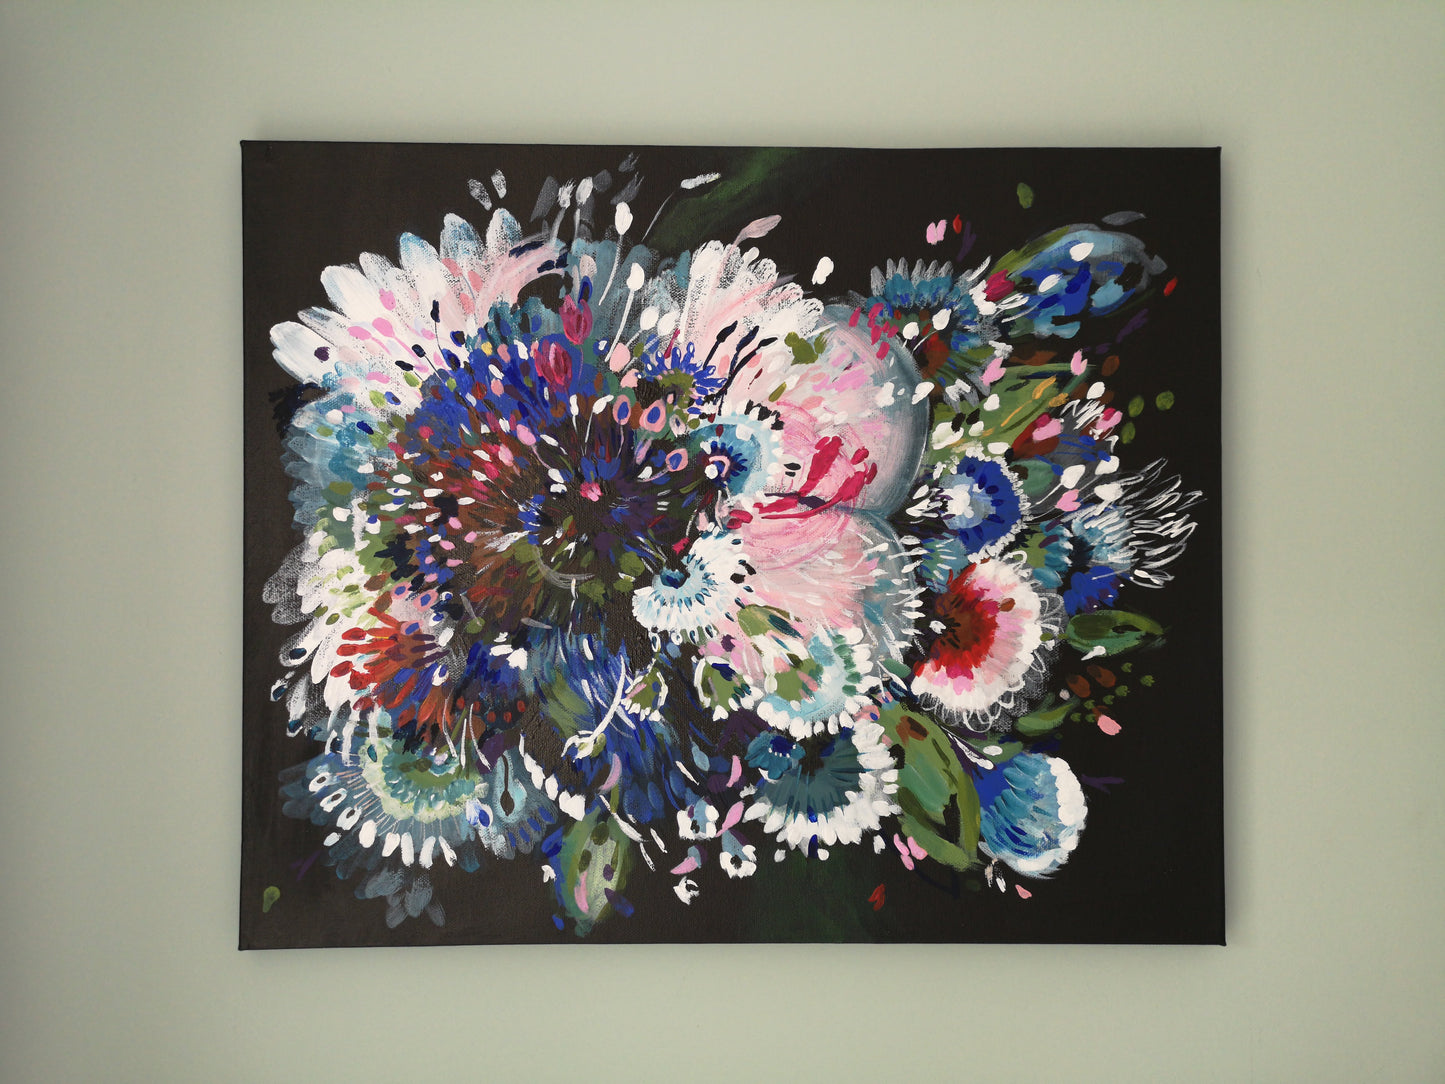 Enchanting Original Abstract painting inspired by flowers blooming. This painting is called Floral Night Garden 1 and is bright and colourful on a dark background to create contrast. By Judy Century Art on Canvas.